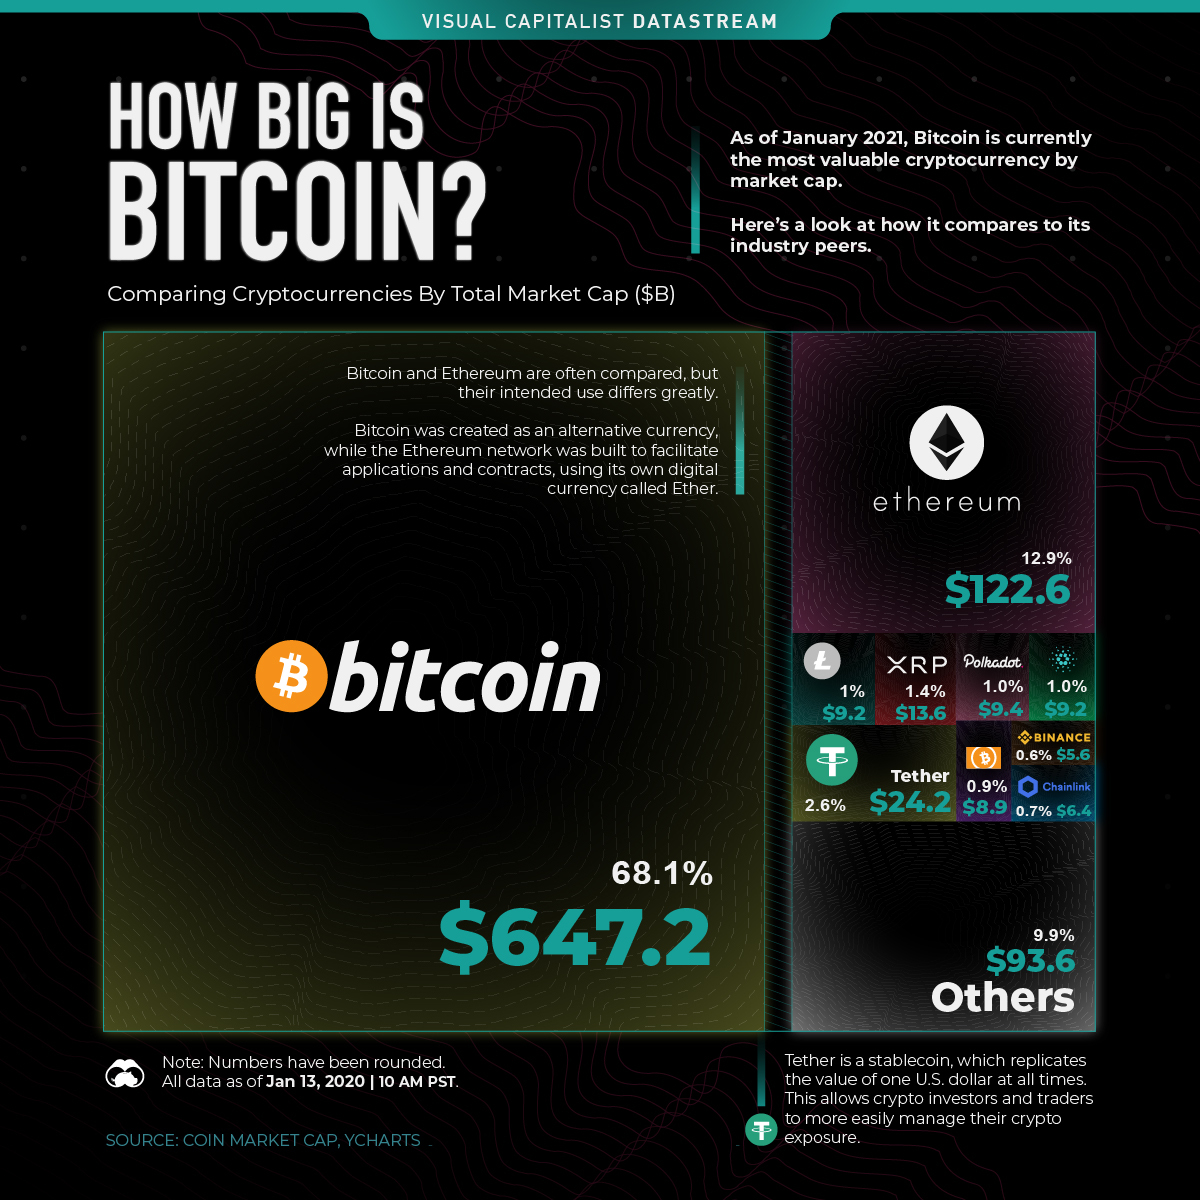 Comparing Bitcoin’s Market Cap to Other Cryptocurrencies ...